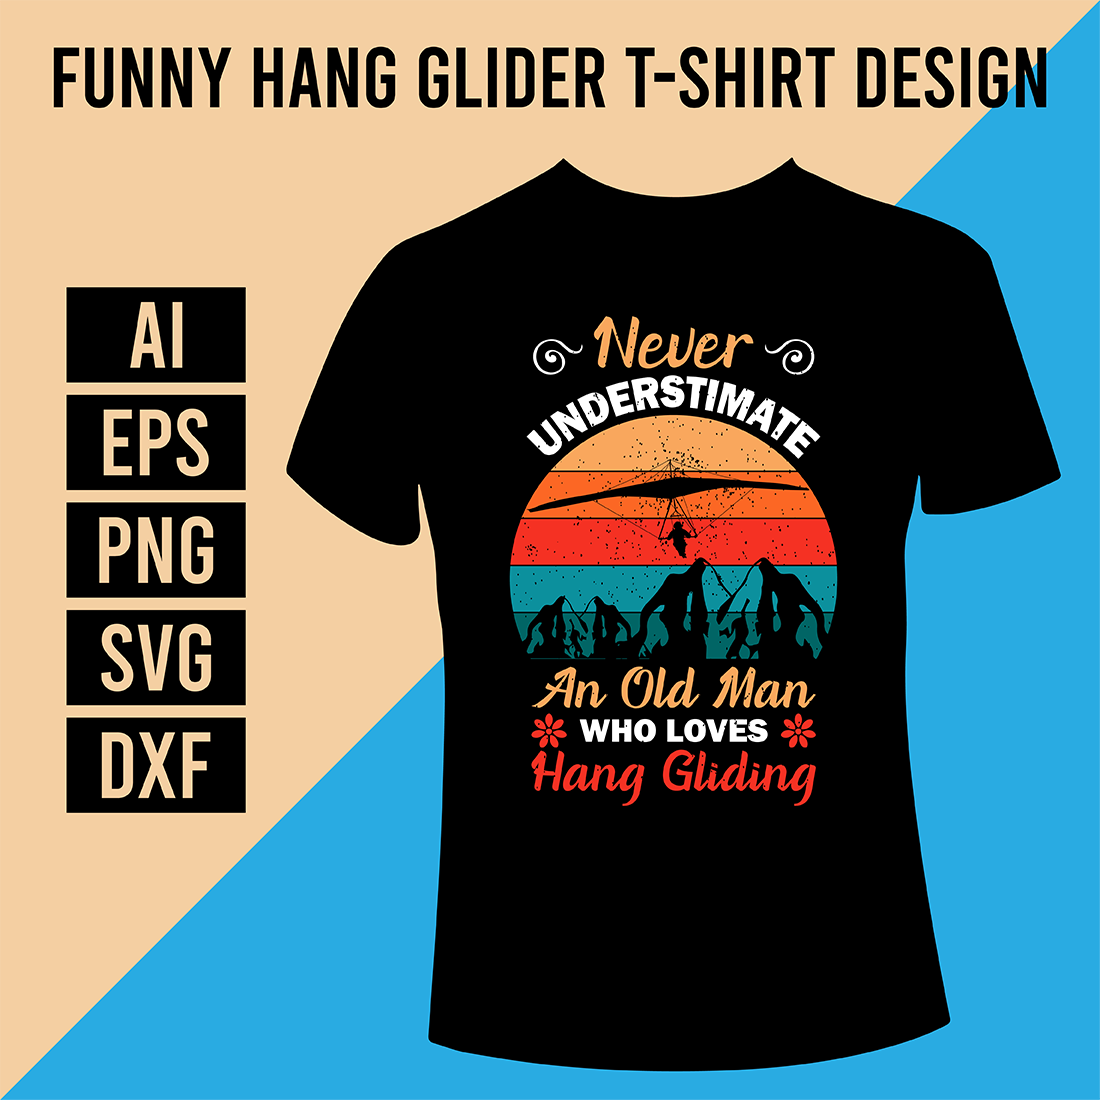 Funny Hang Glider T-Shirt Design cover image.